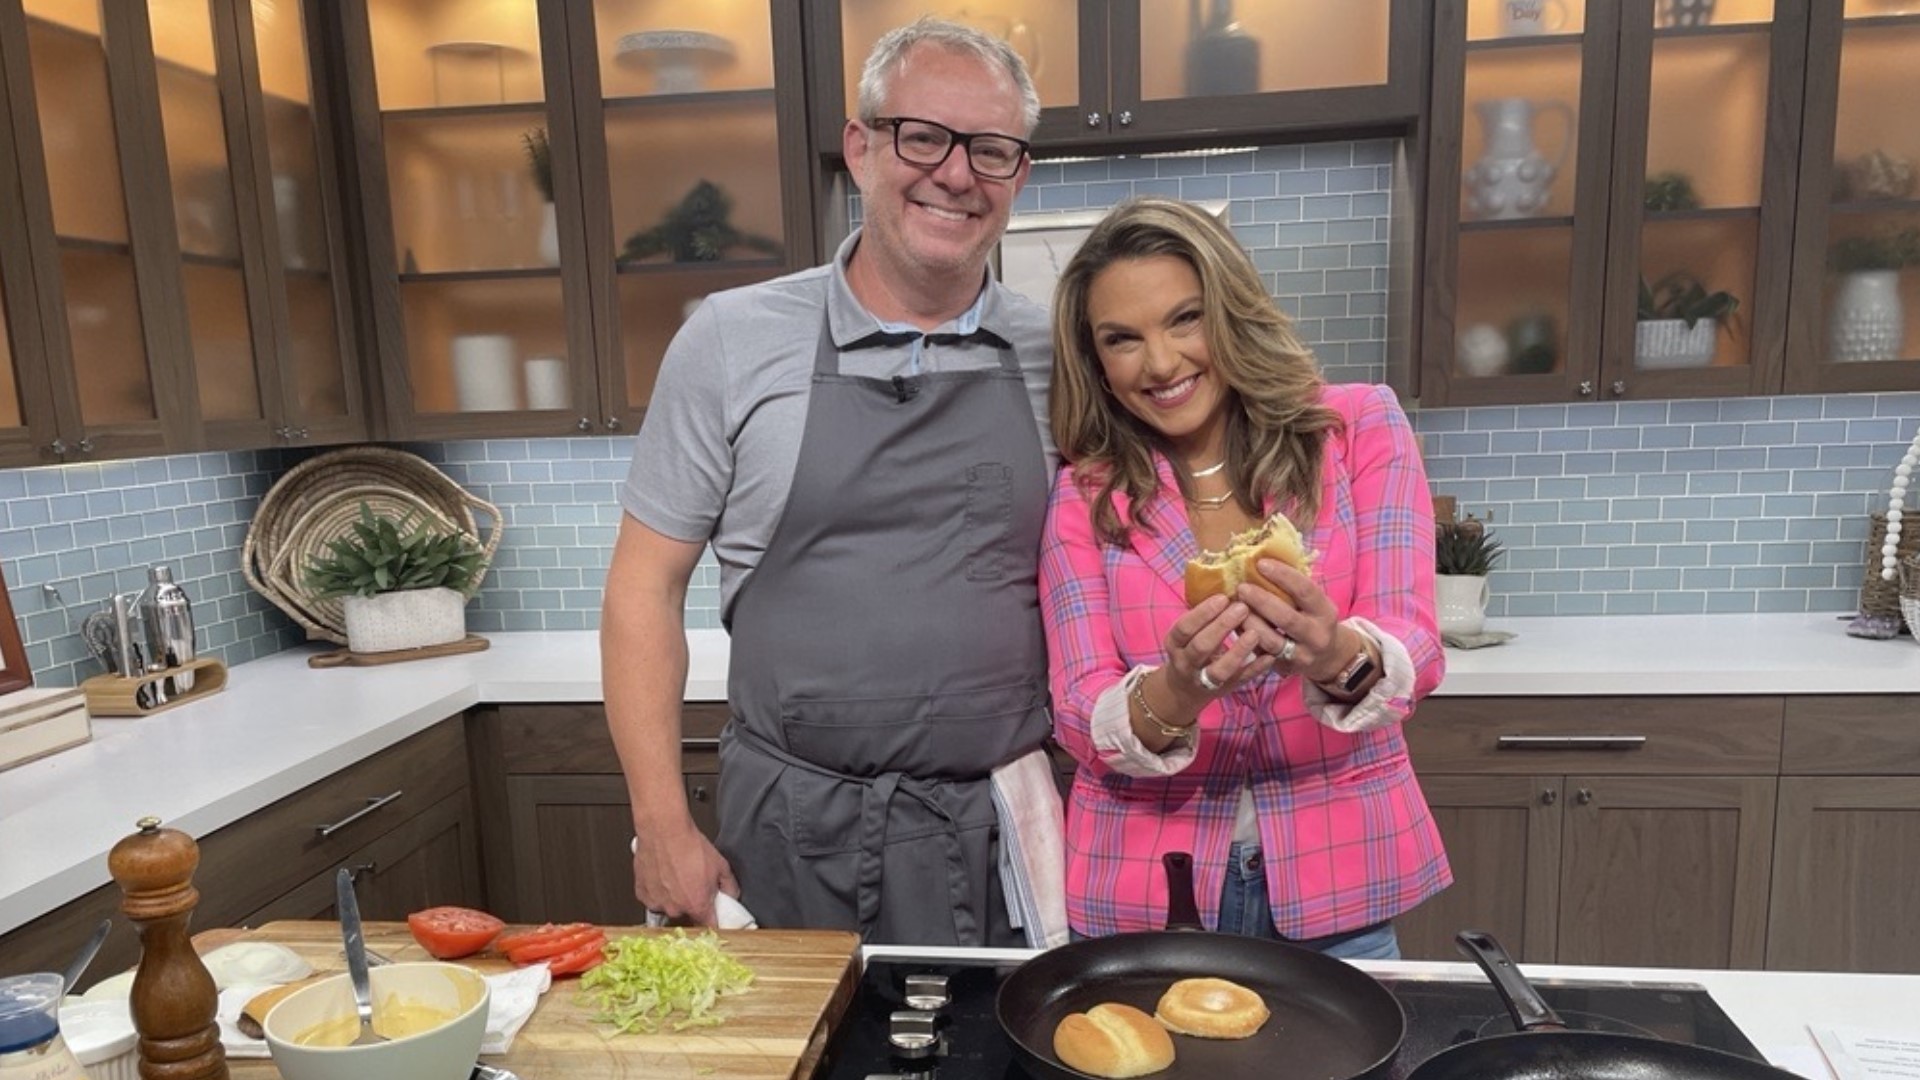 Chef Ethan Stowell joined the show to make a delicious burger and tells us about the upcoming Ballard Bites & Brews event benefiting Ballard Food Bank. #newdaynw